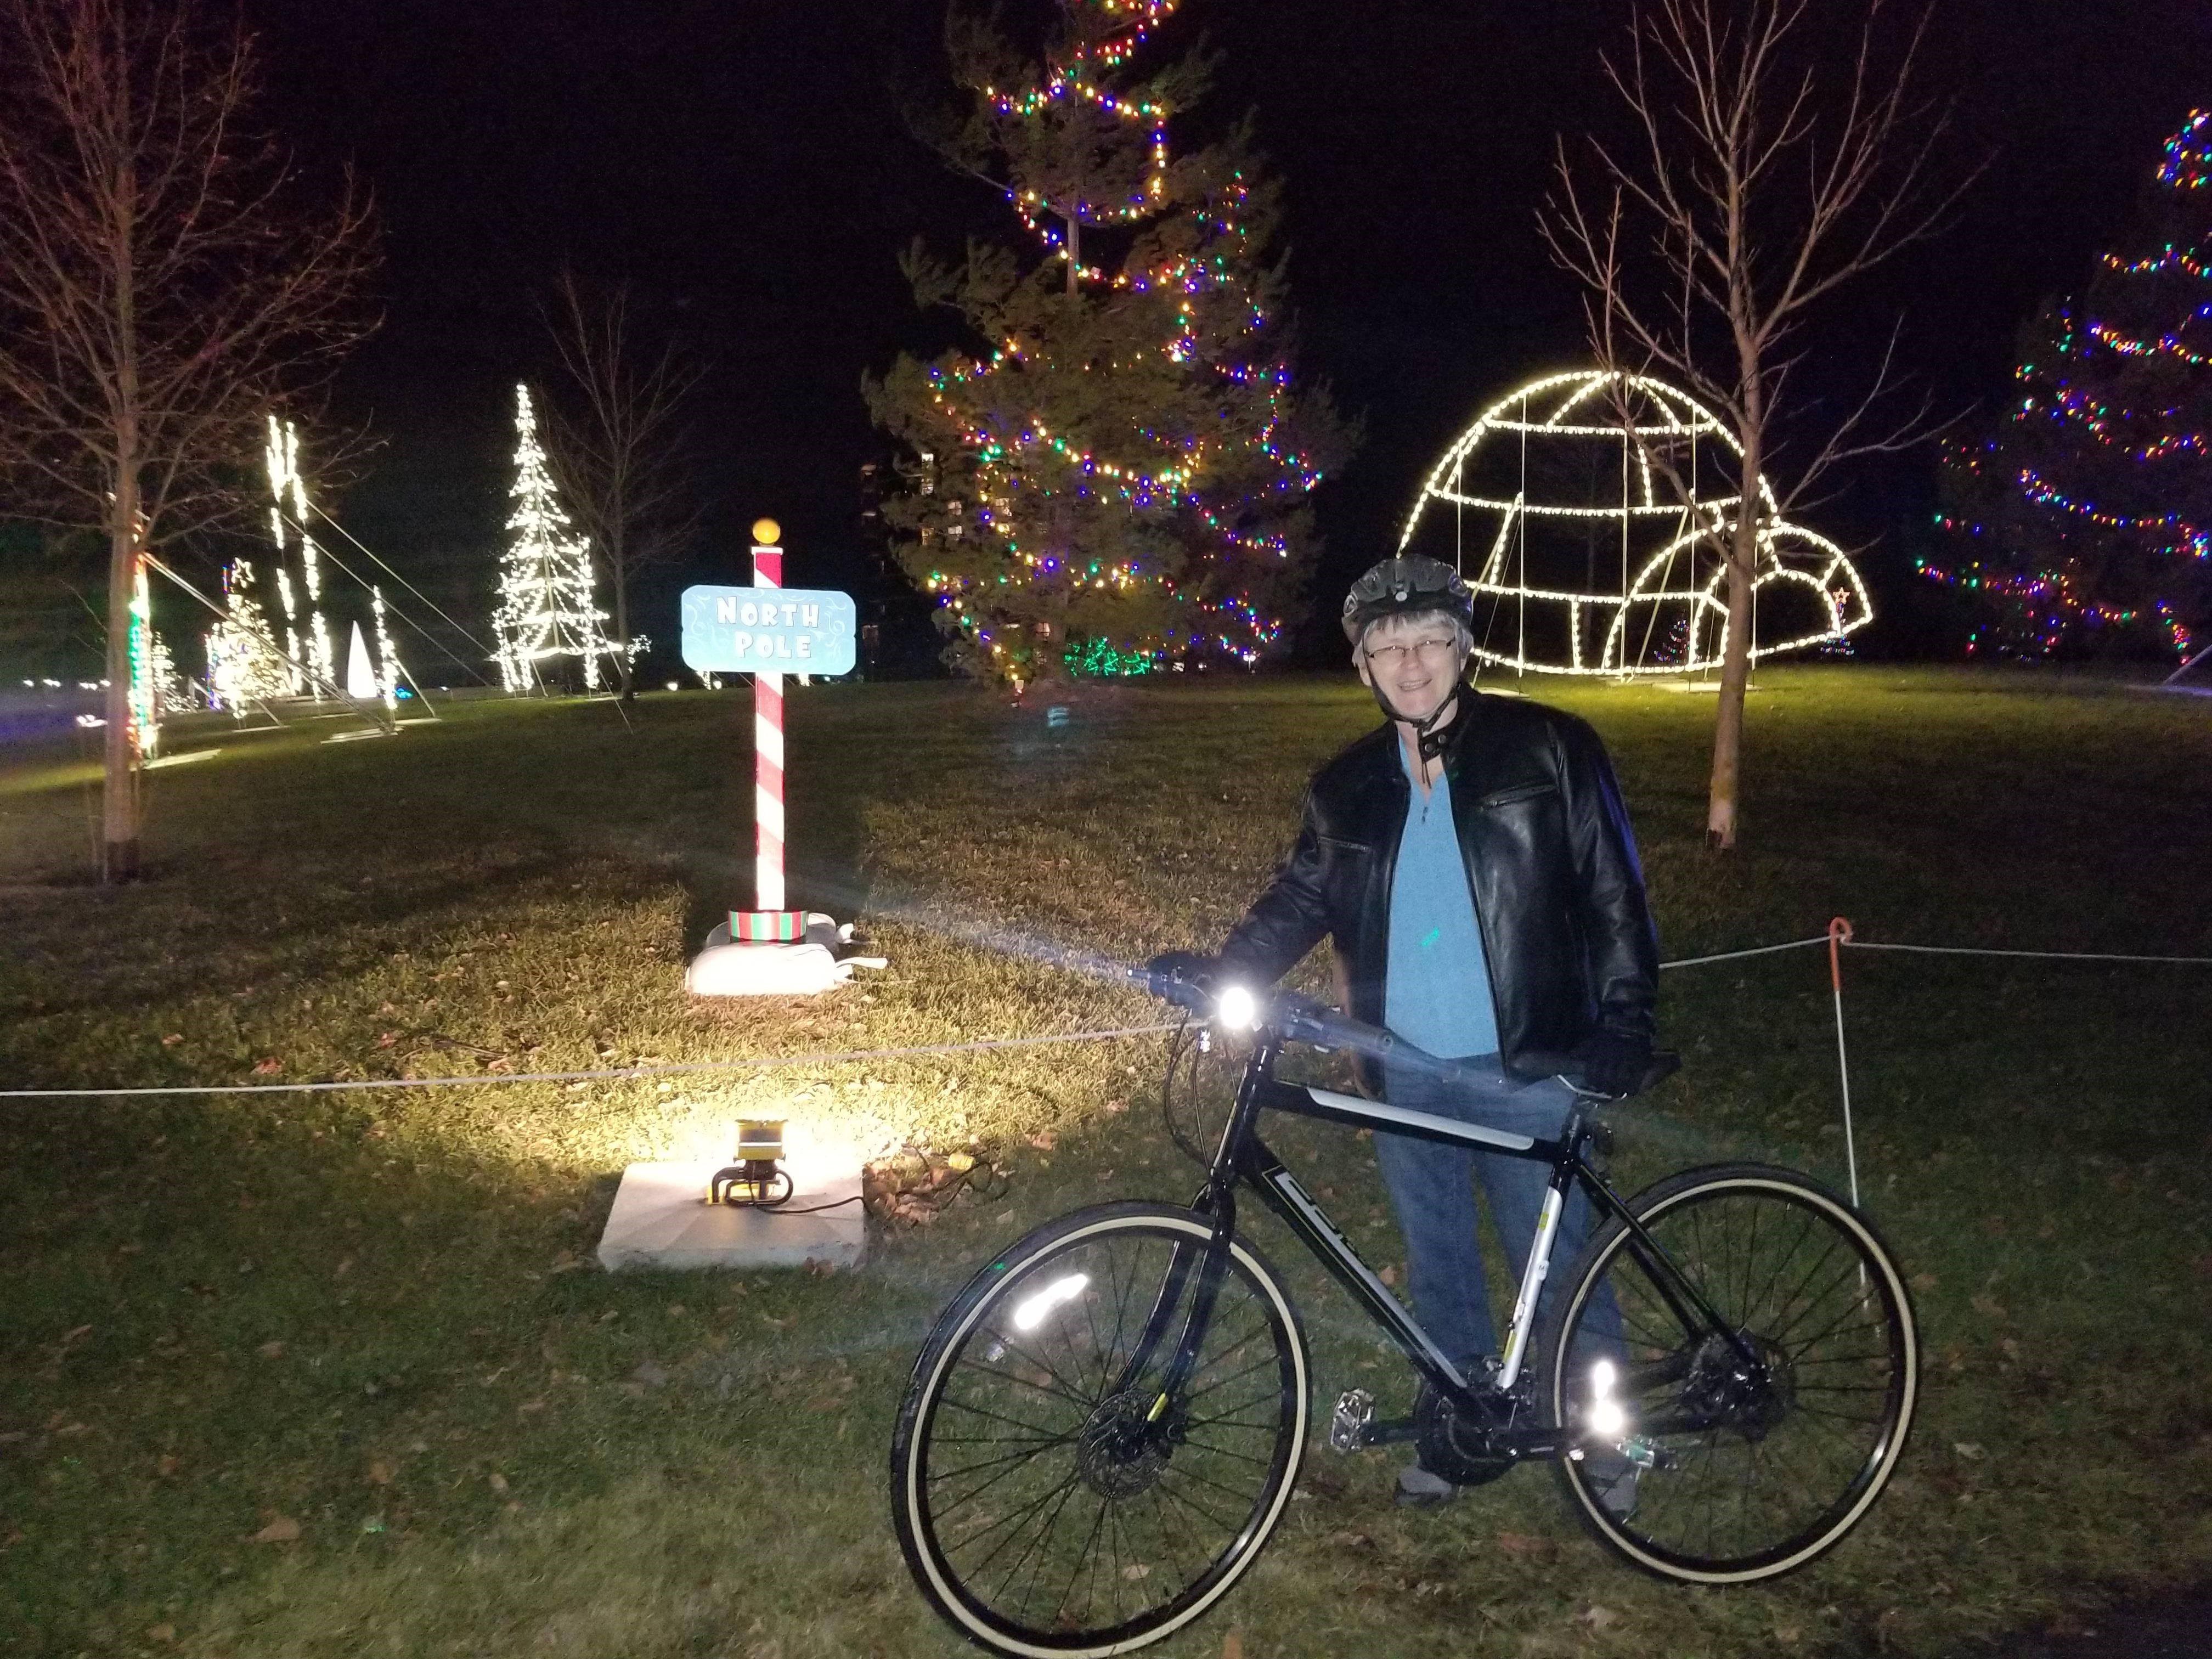 Donnah stands with her bike in front of some festive decorations